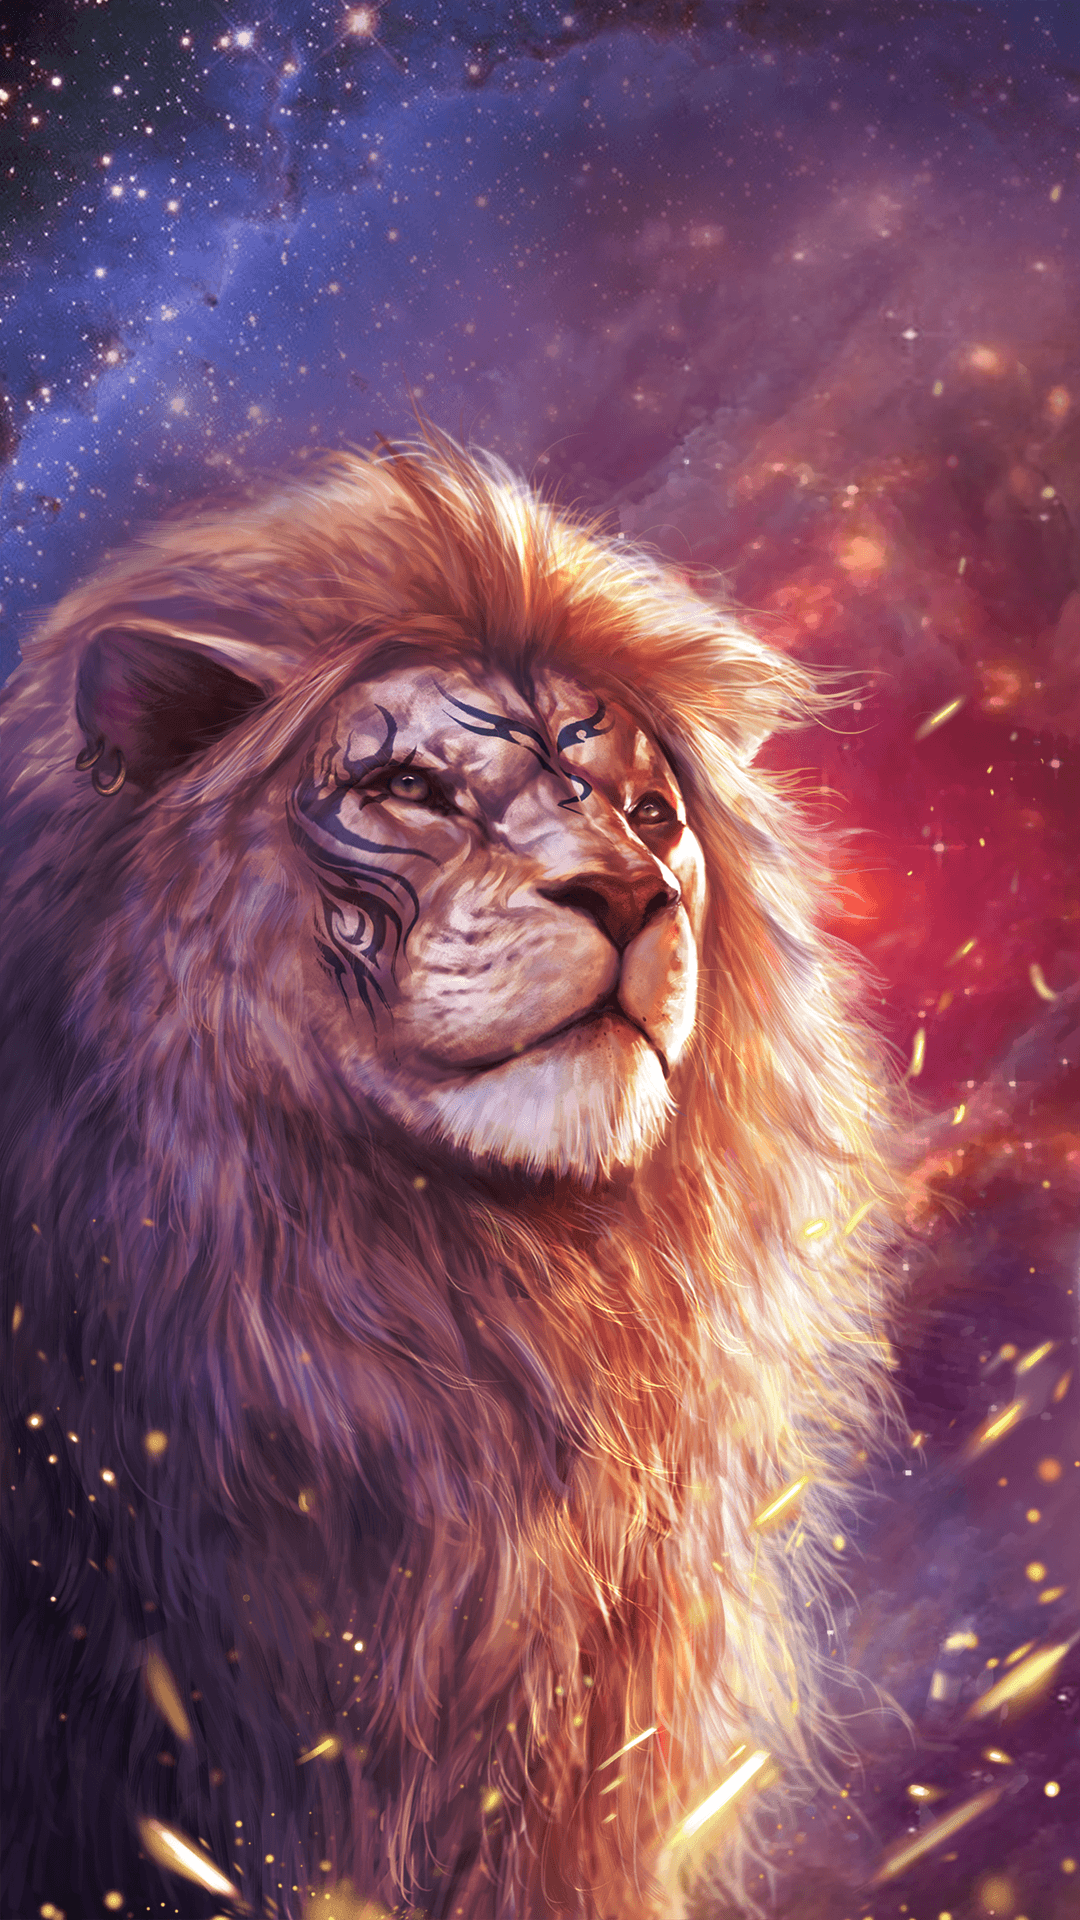 Cool Lion Backgrounds - High Quality Wallpapers For Iphone - HD Wallpaper 